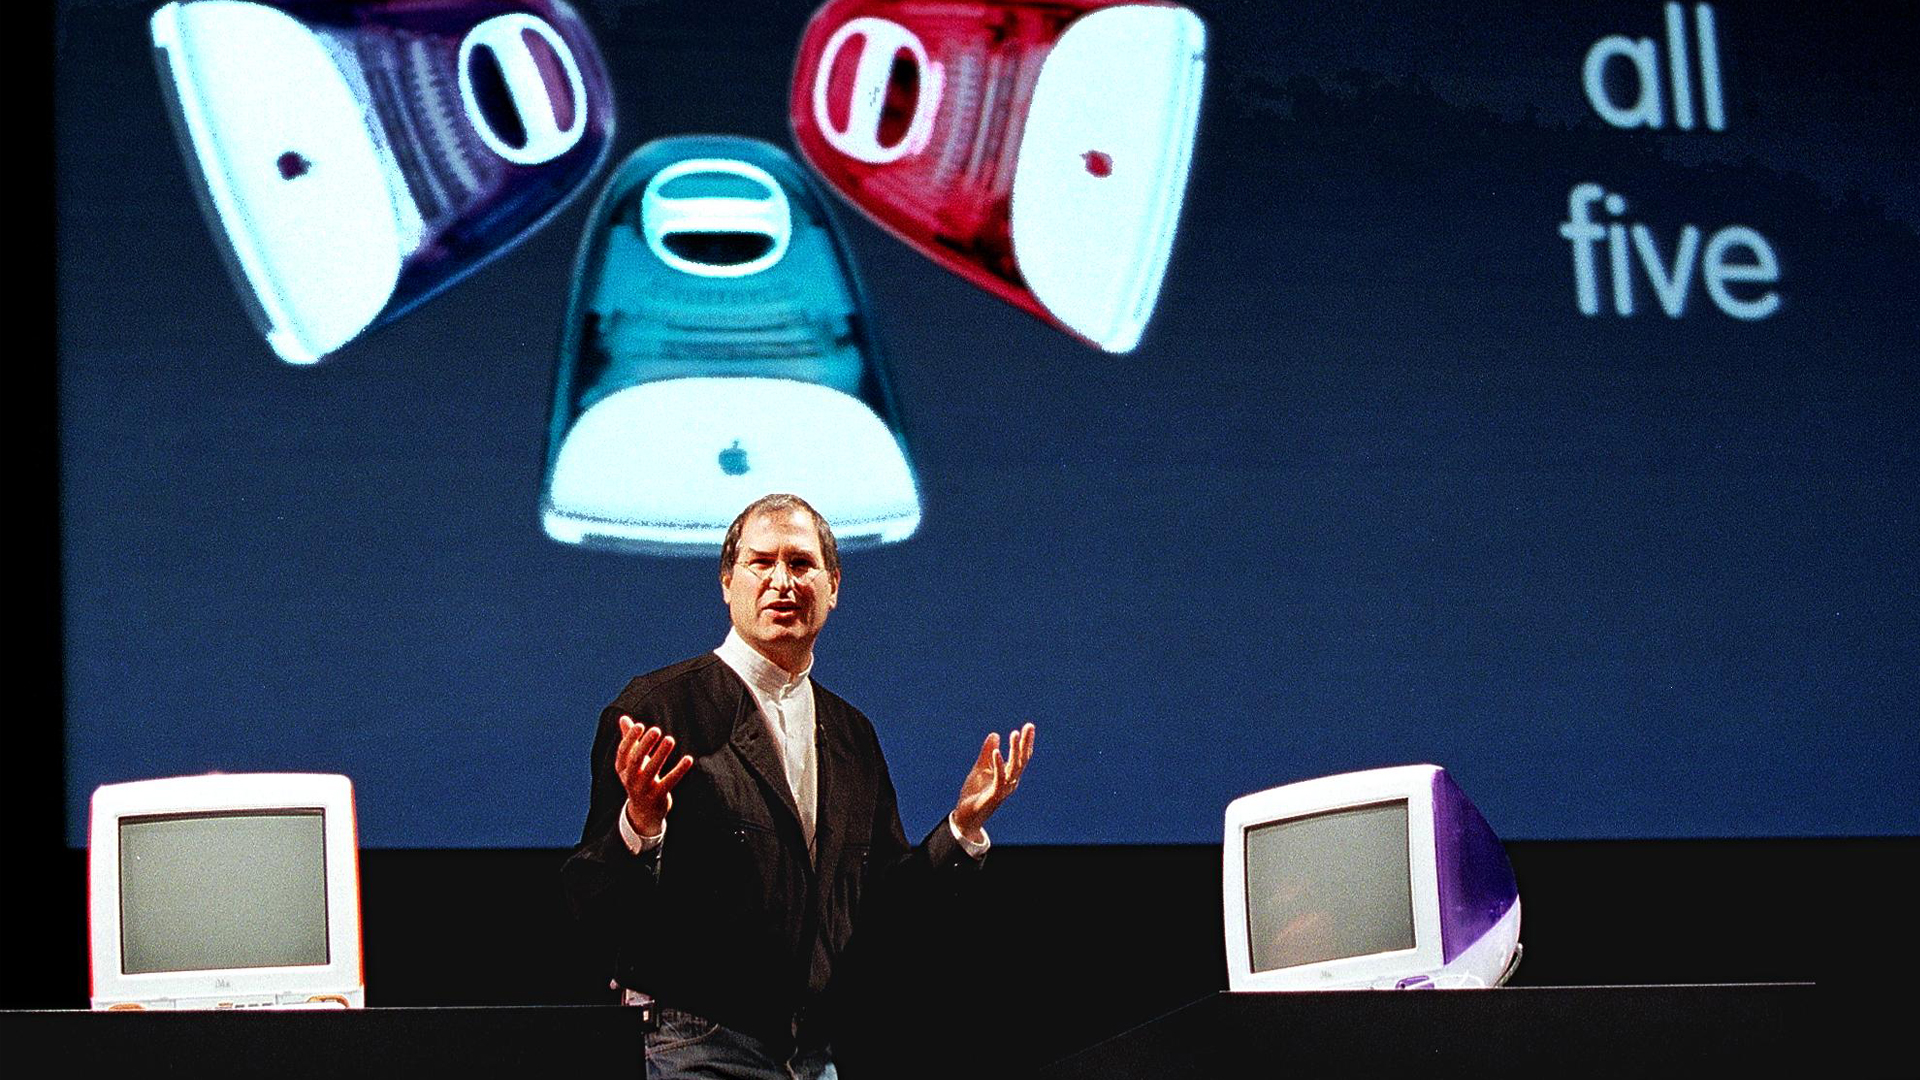 Steve Jobs unveils the iMac in 1998